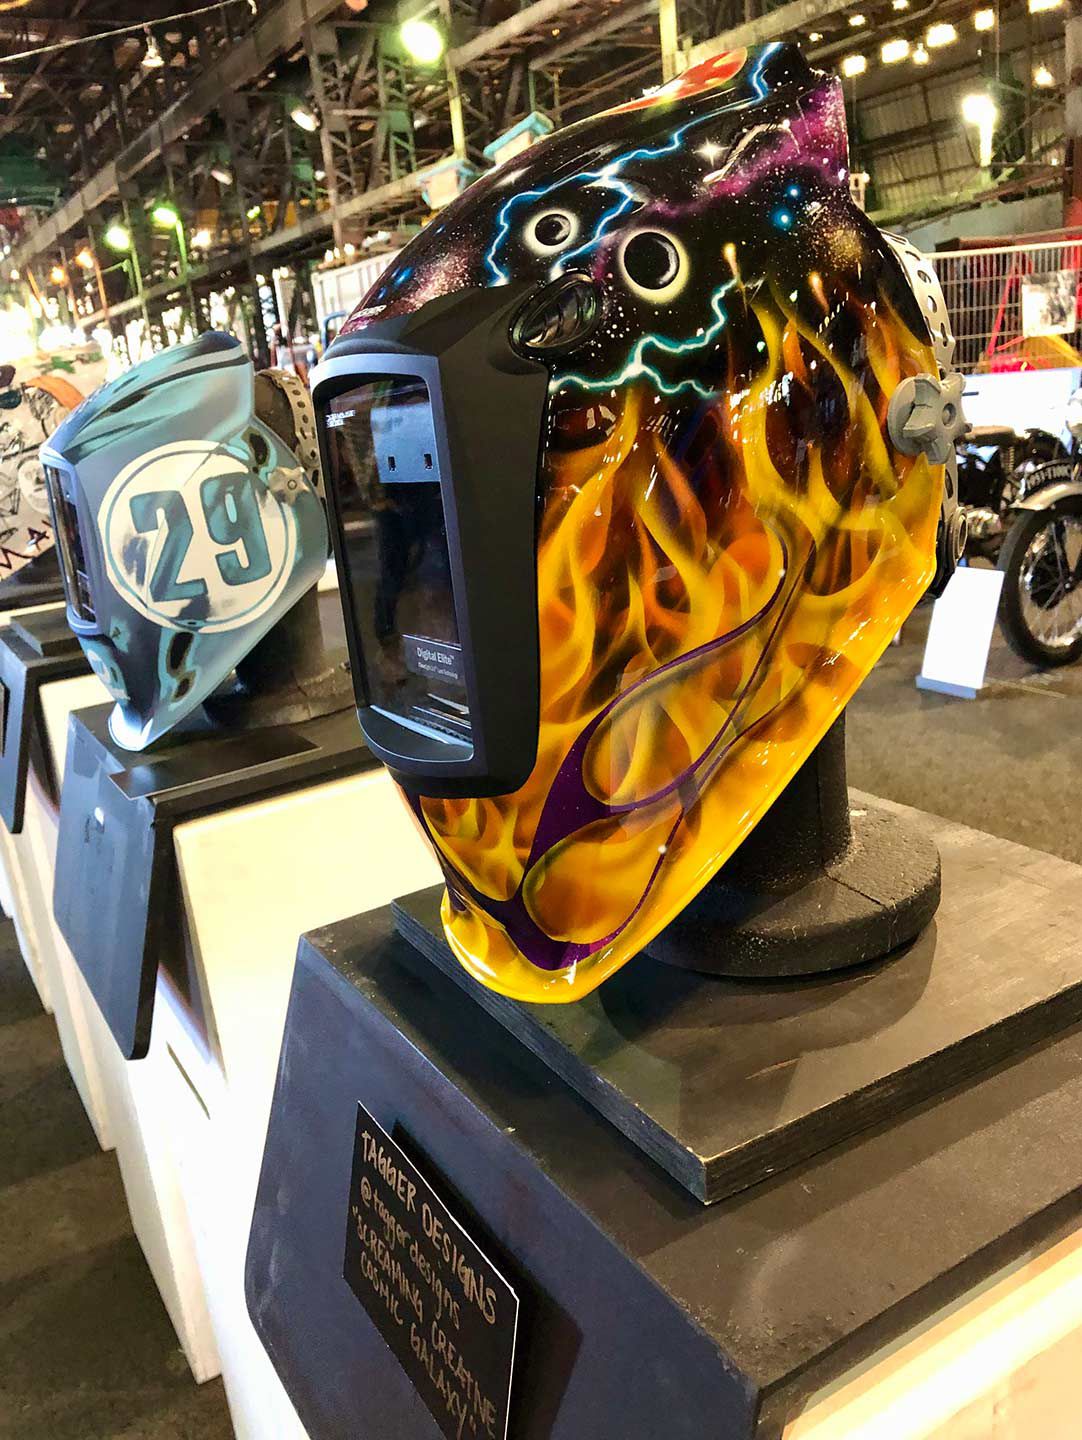 The 21 Helmets show-within-a-show had its usual slot in the weekend’s run of events. This year’s funky theme seemed to be all about arty welding helmets.